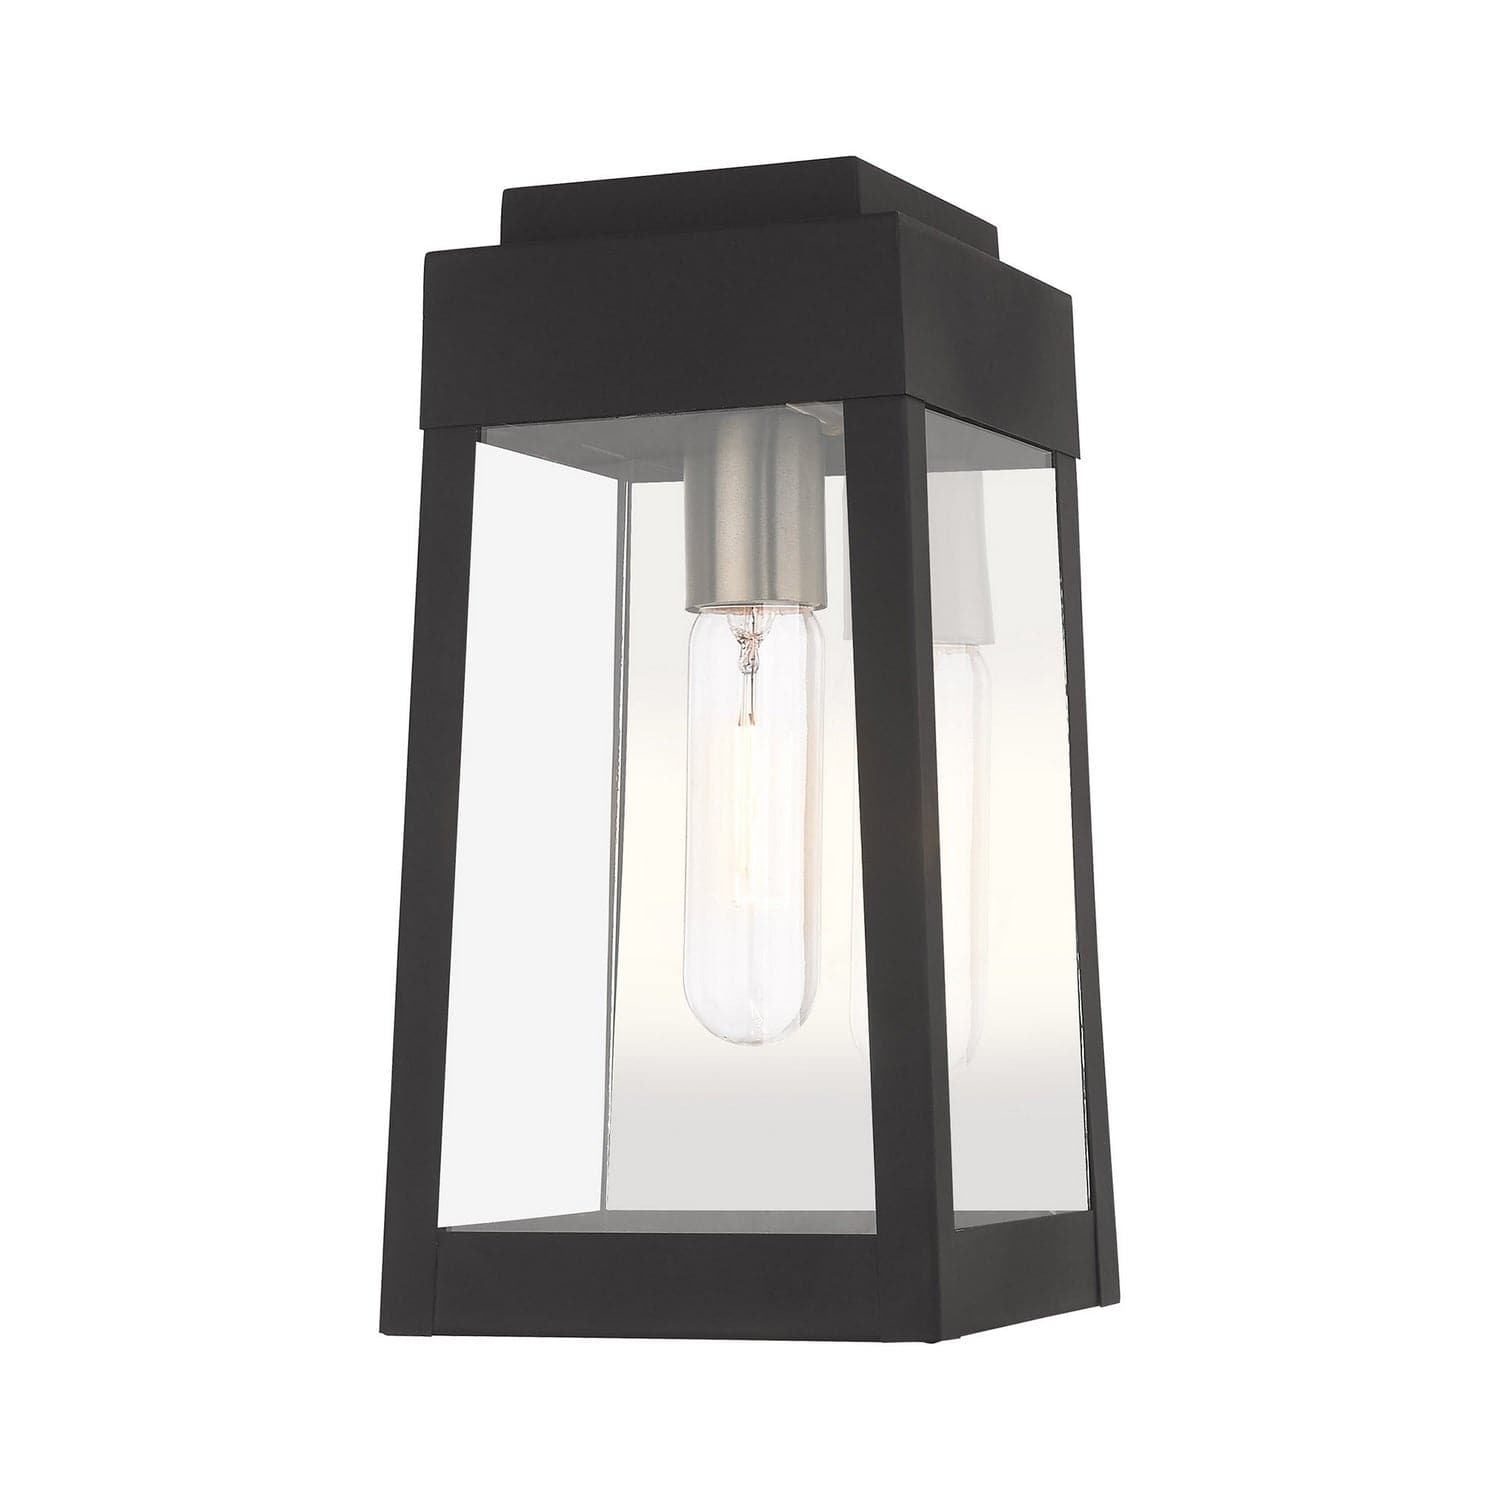 Livex Lighting - 20852-04 - One Light Outdoor Wall Lantern - Oslo - Black w/ Brushed Nickels and Polished Chrome Stainless Steel